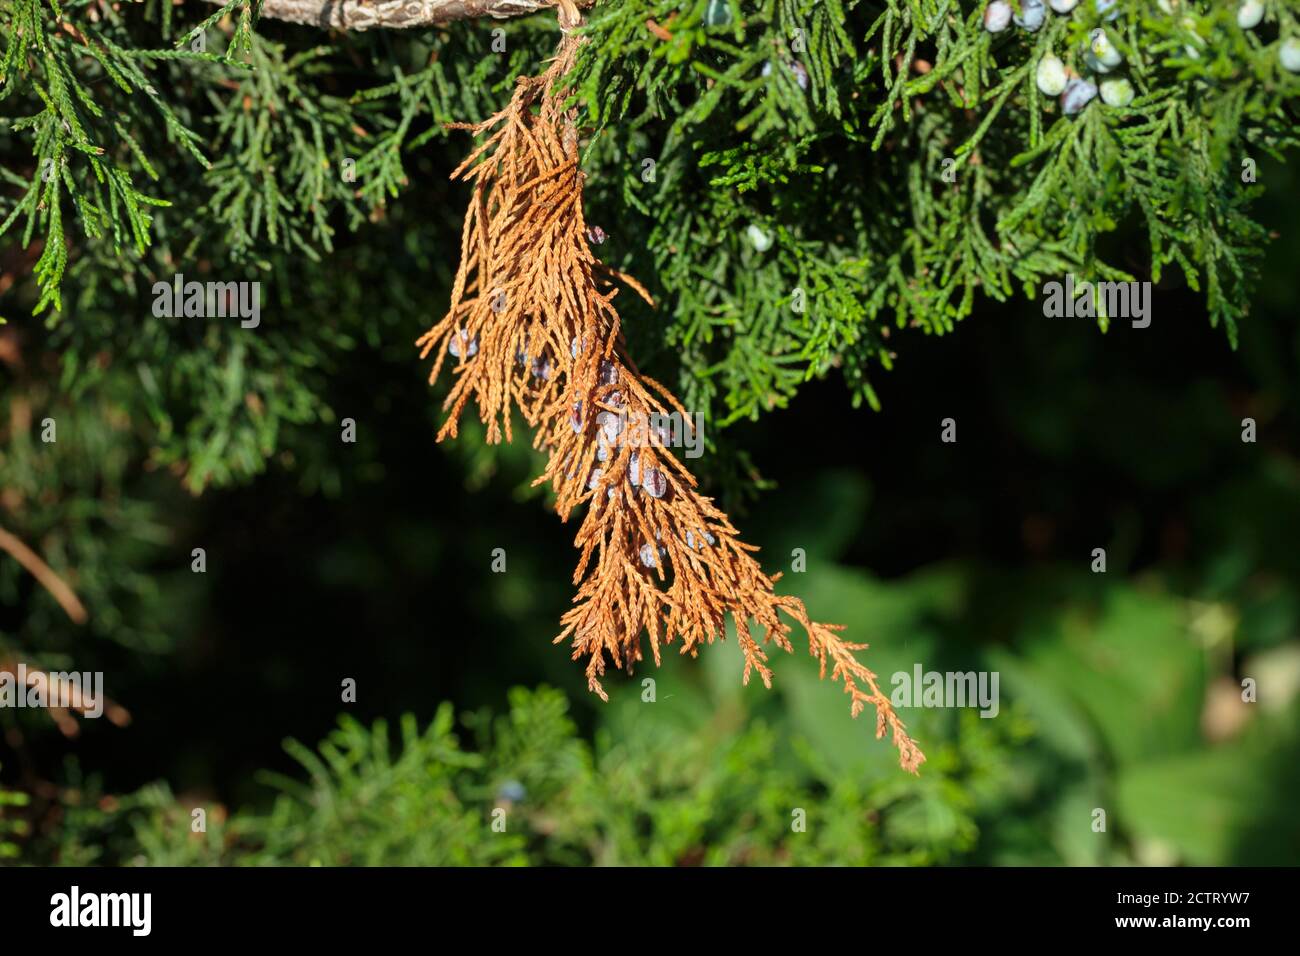 a dried up branch of a Juniper tree that has turned brown with the berries still clinging to the branch, surrounded by other still green branches Stock Photo